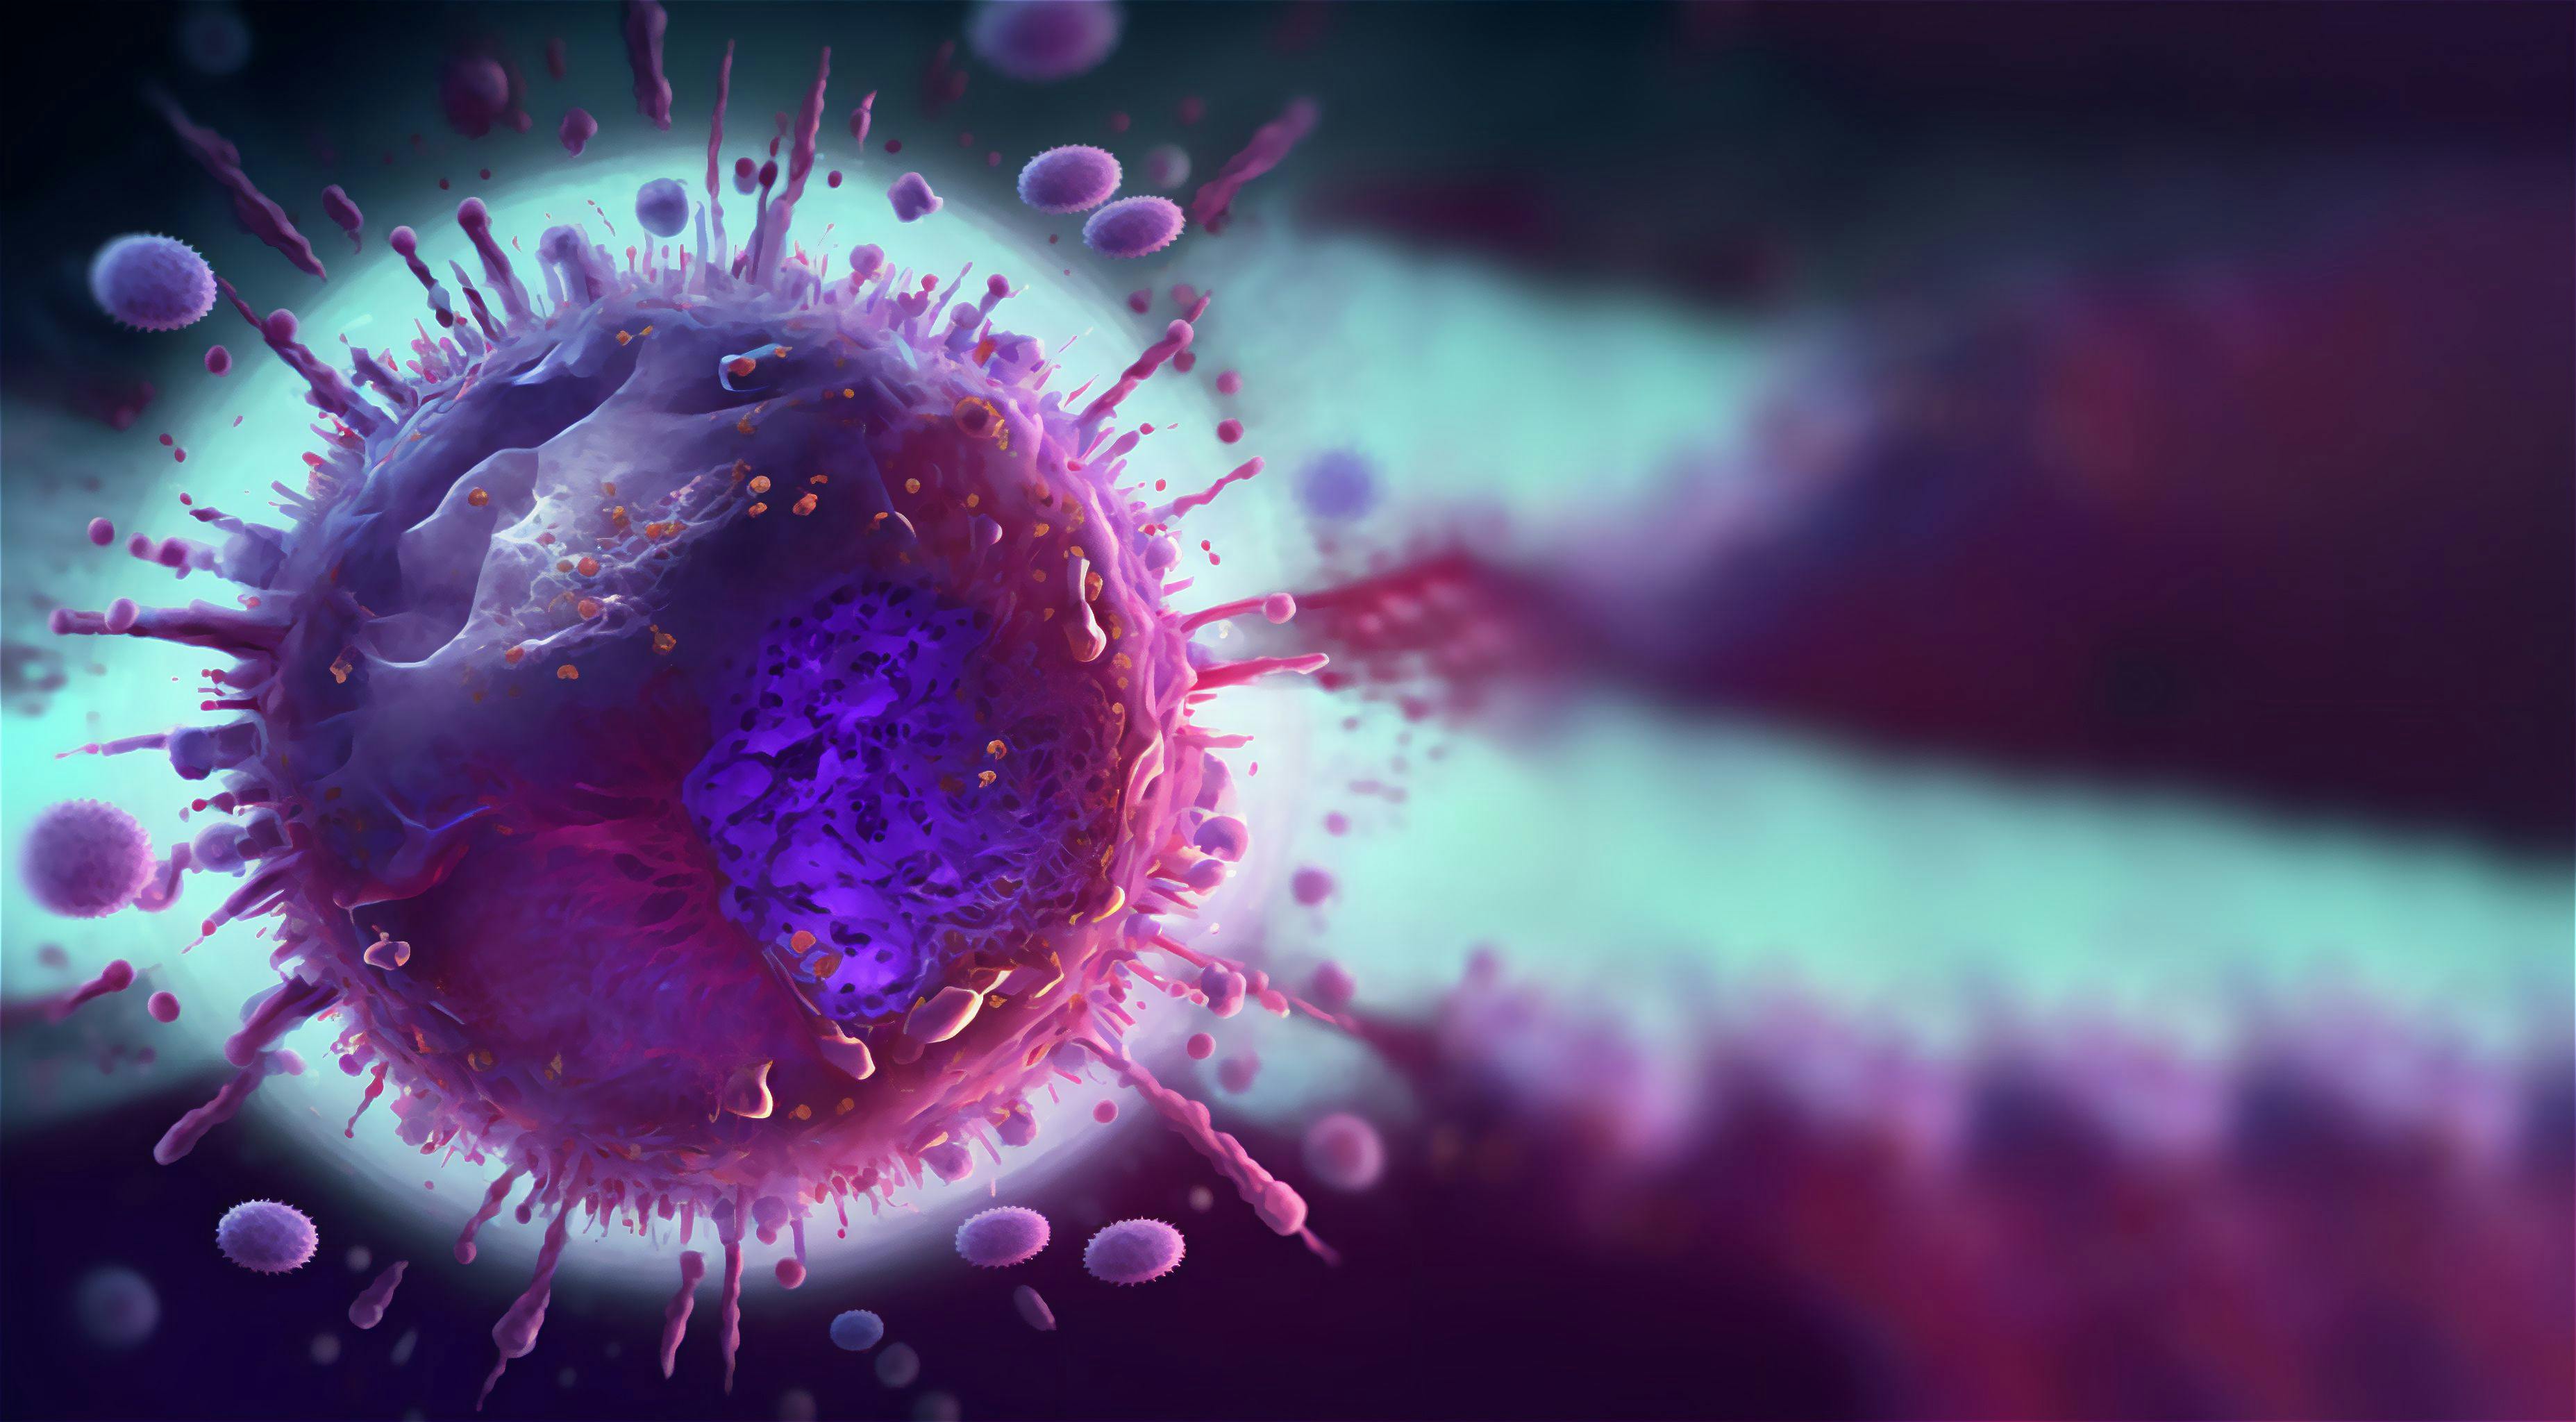 RSV virus, Respiratory syncytial virus, a common, contagious airborne virus that causes infections of the respiratory tract | Image Credit: catalin - stock.adobe.com